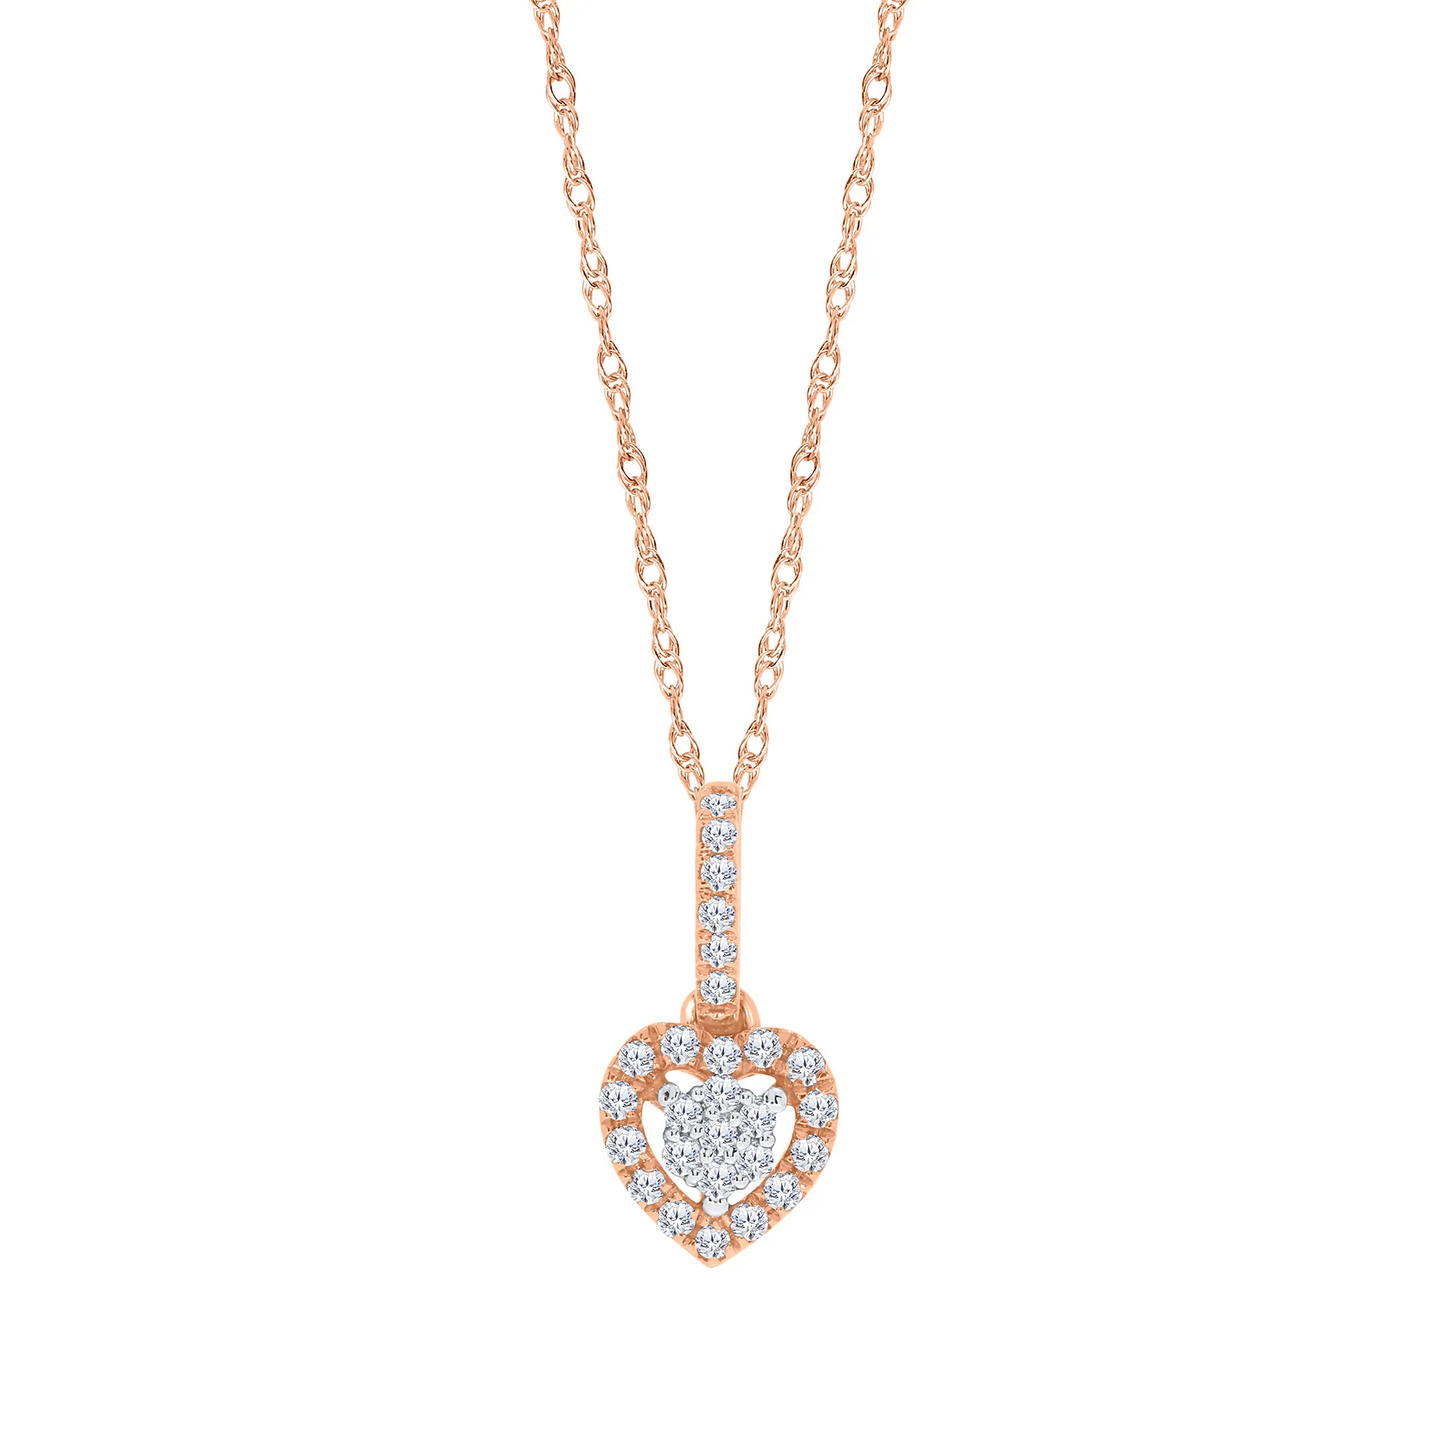 10K ROSE GOLD .20 CARAT REAL DIAMOND HEART PENDANT NECKLACE WITH ROSE GOLD CHAIN